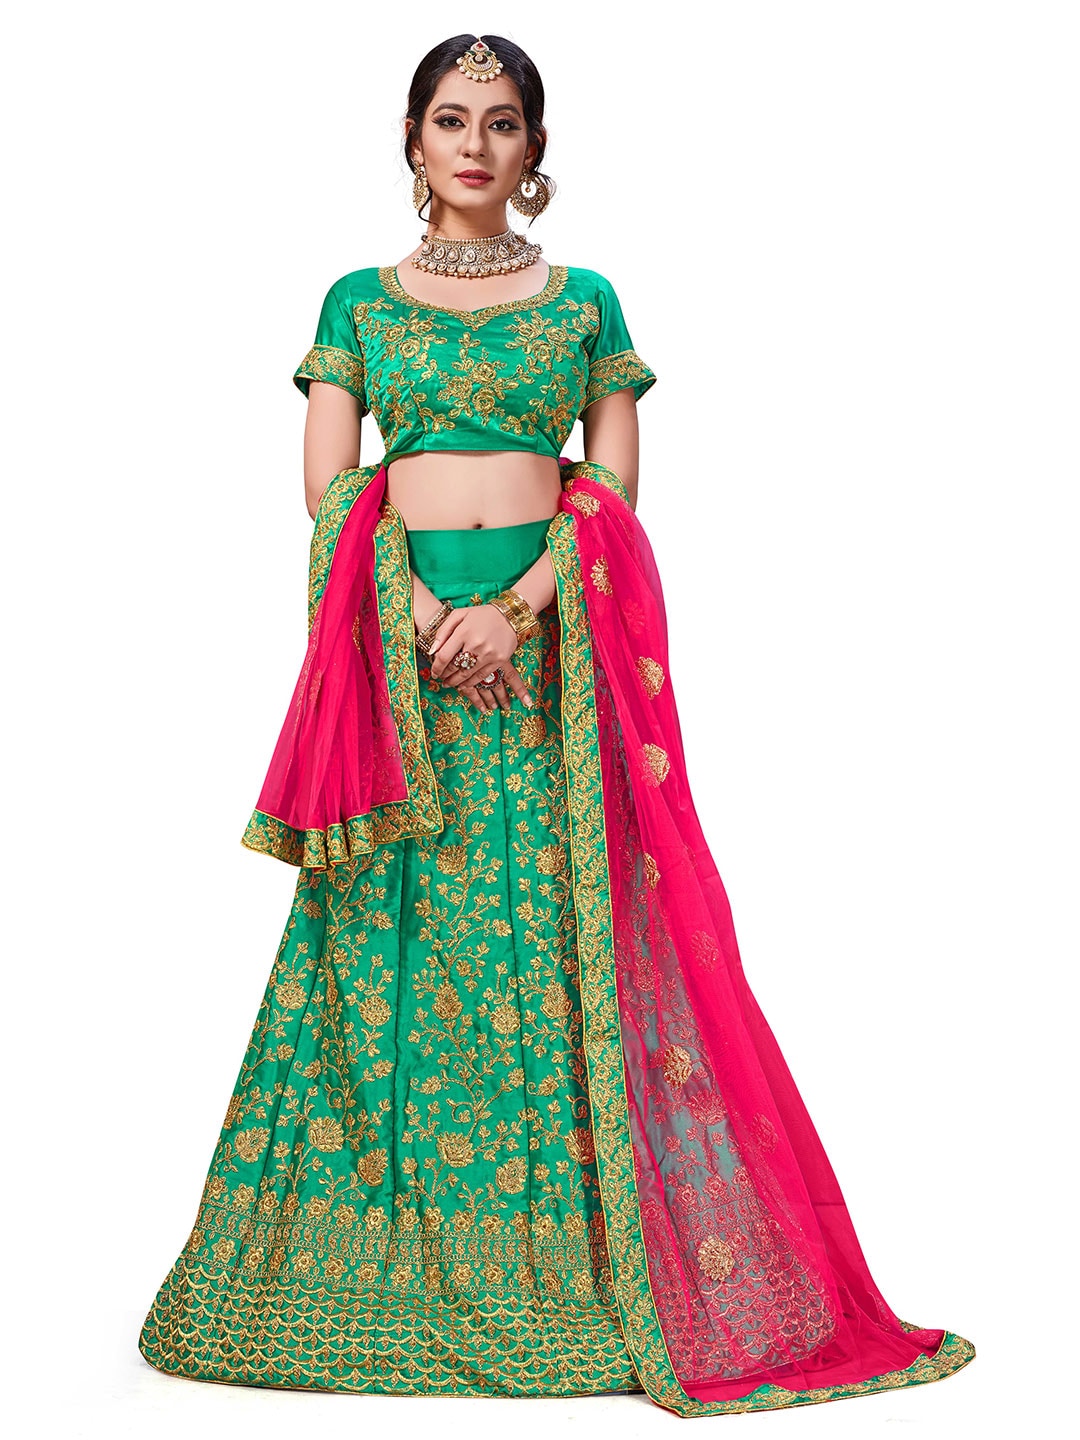 MANVAA Green & Pink Embroidered Thread Work Semi-Stitched Lehenga & Unstitched Blouse With Dupatta Price in India